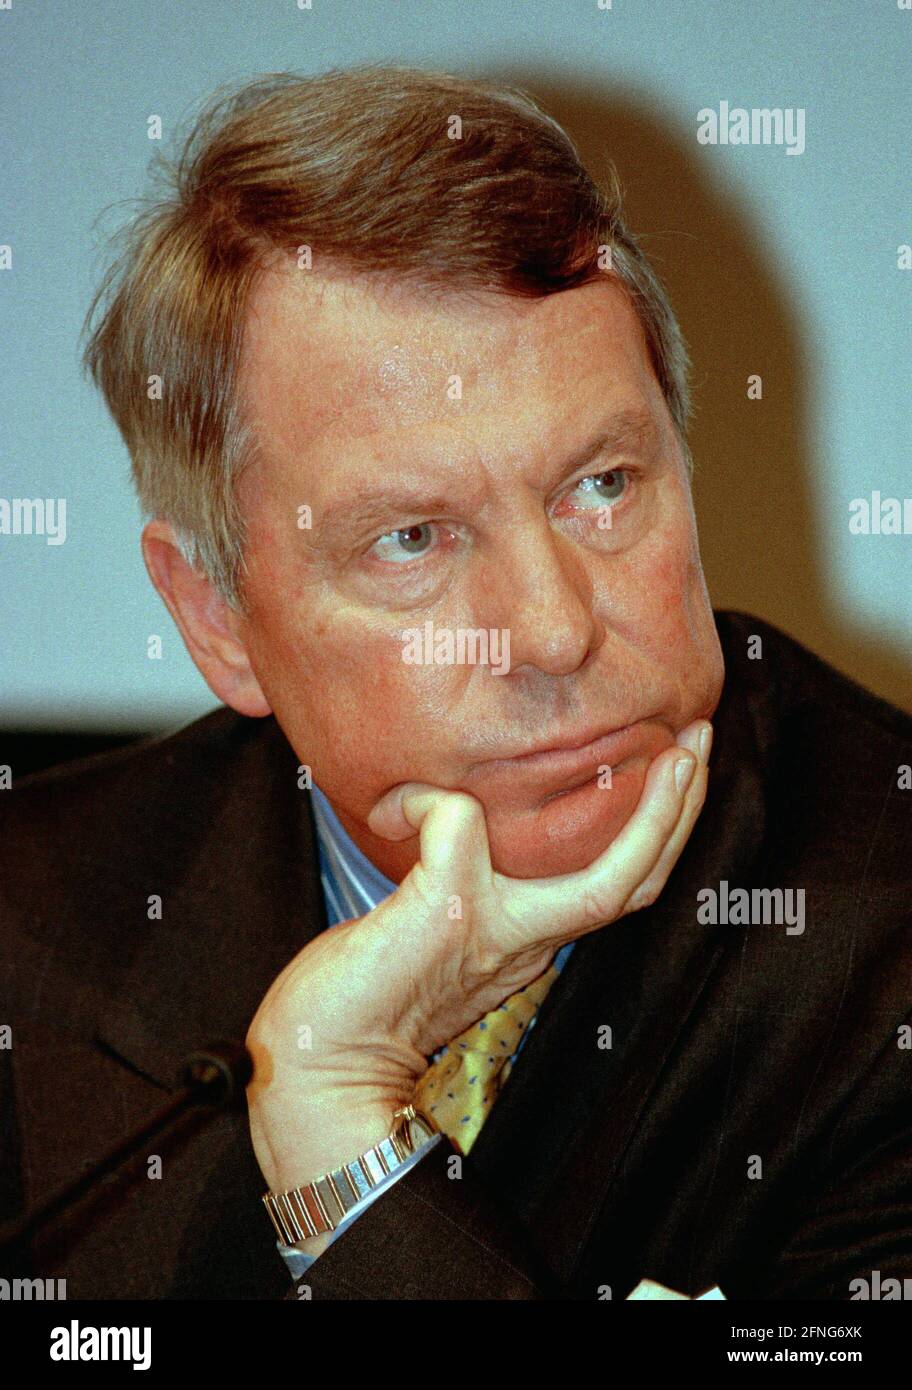 Manfred SCHNEIDER , Chairman of the Board of Management of Bayer AG , March 1999 [automated translation] Stock Photo